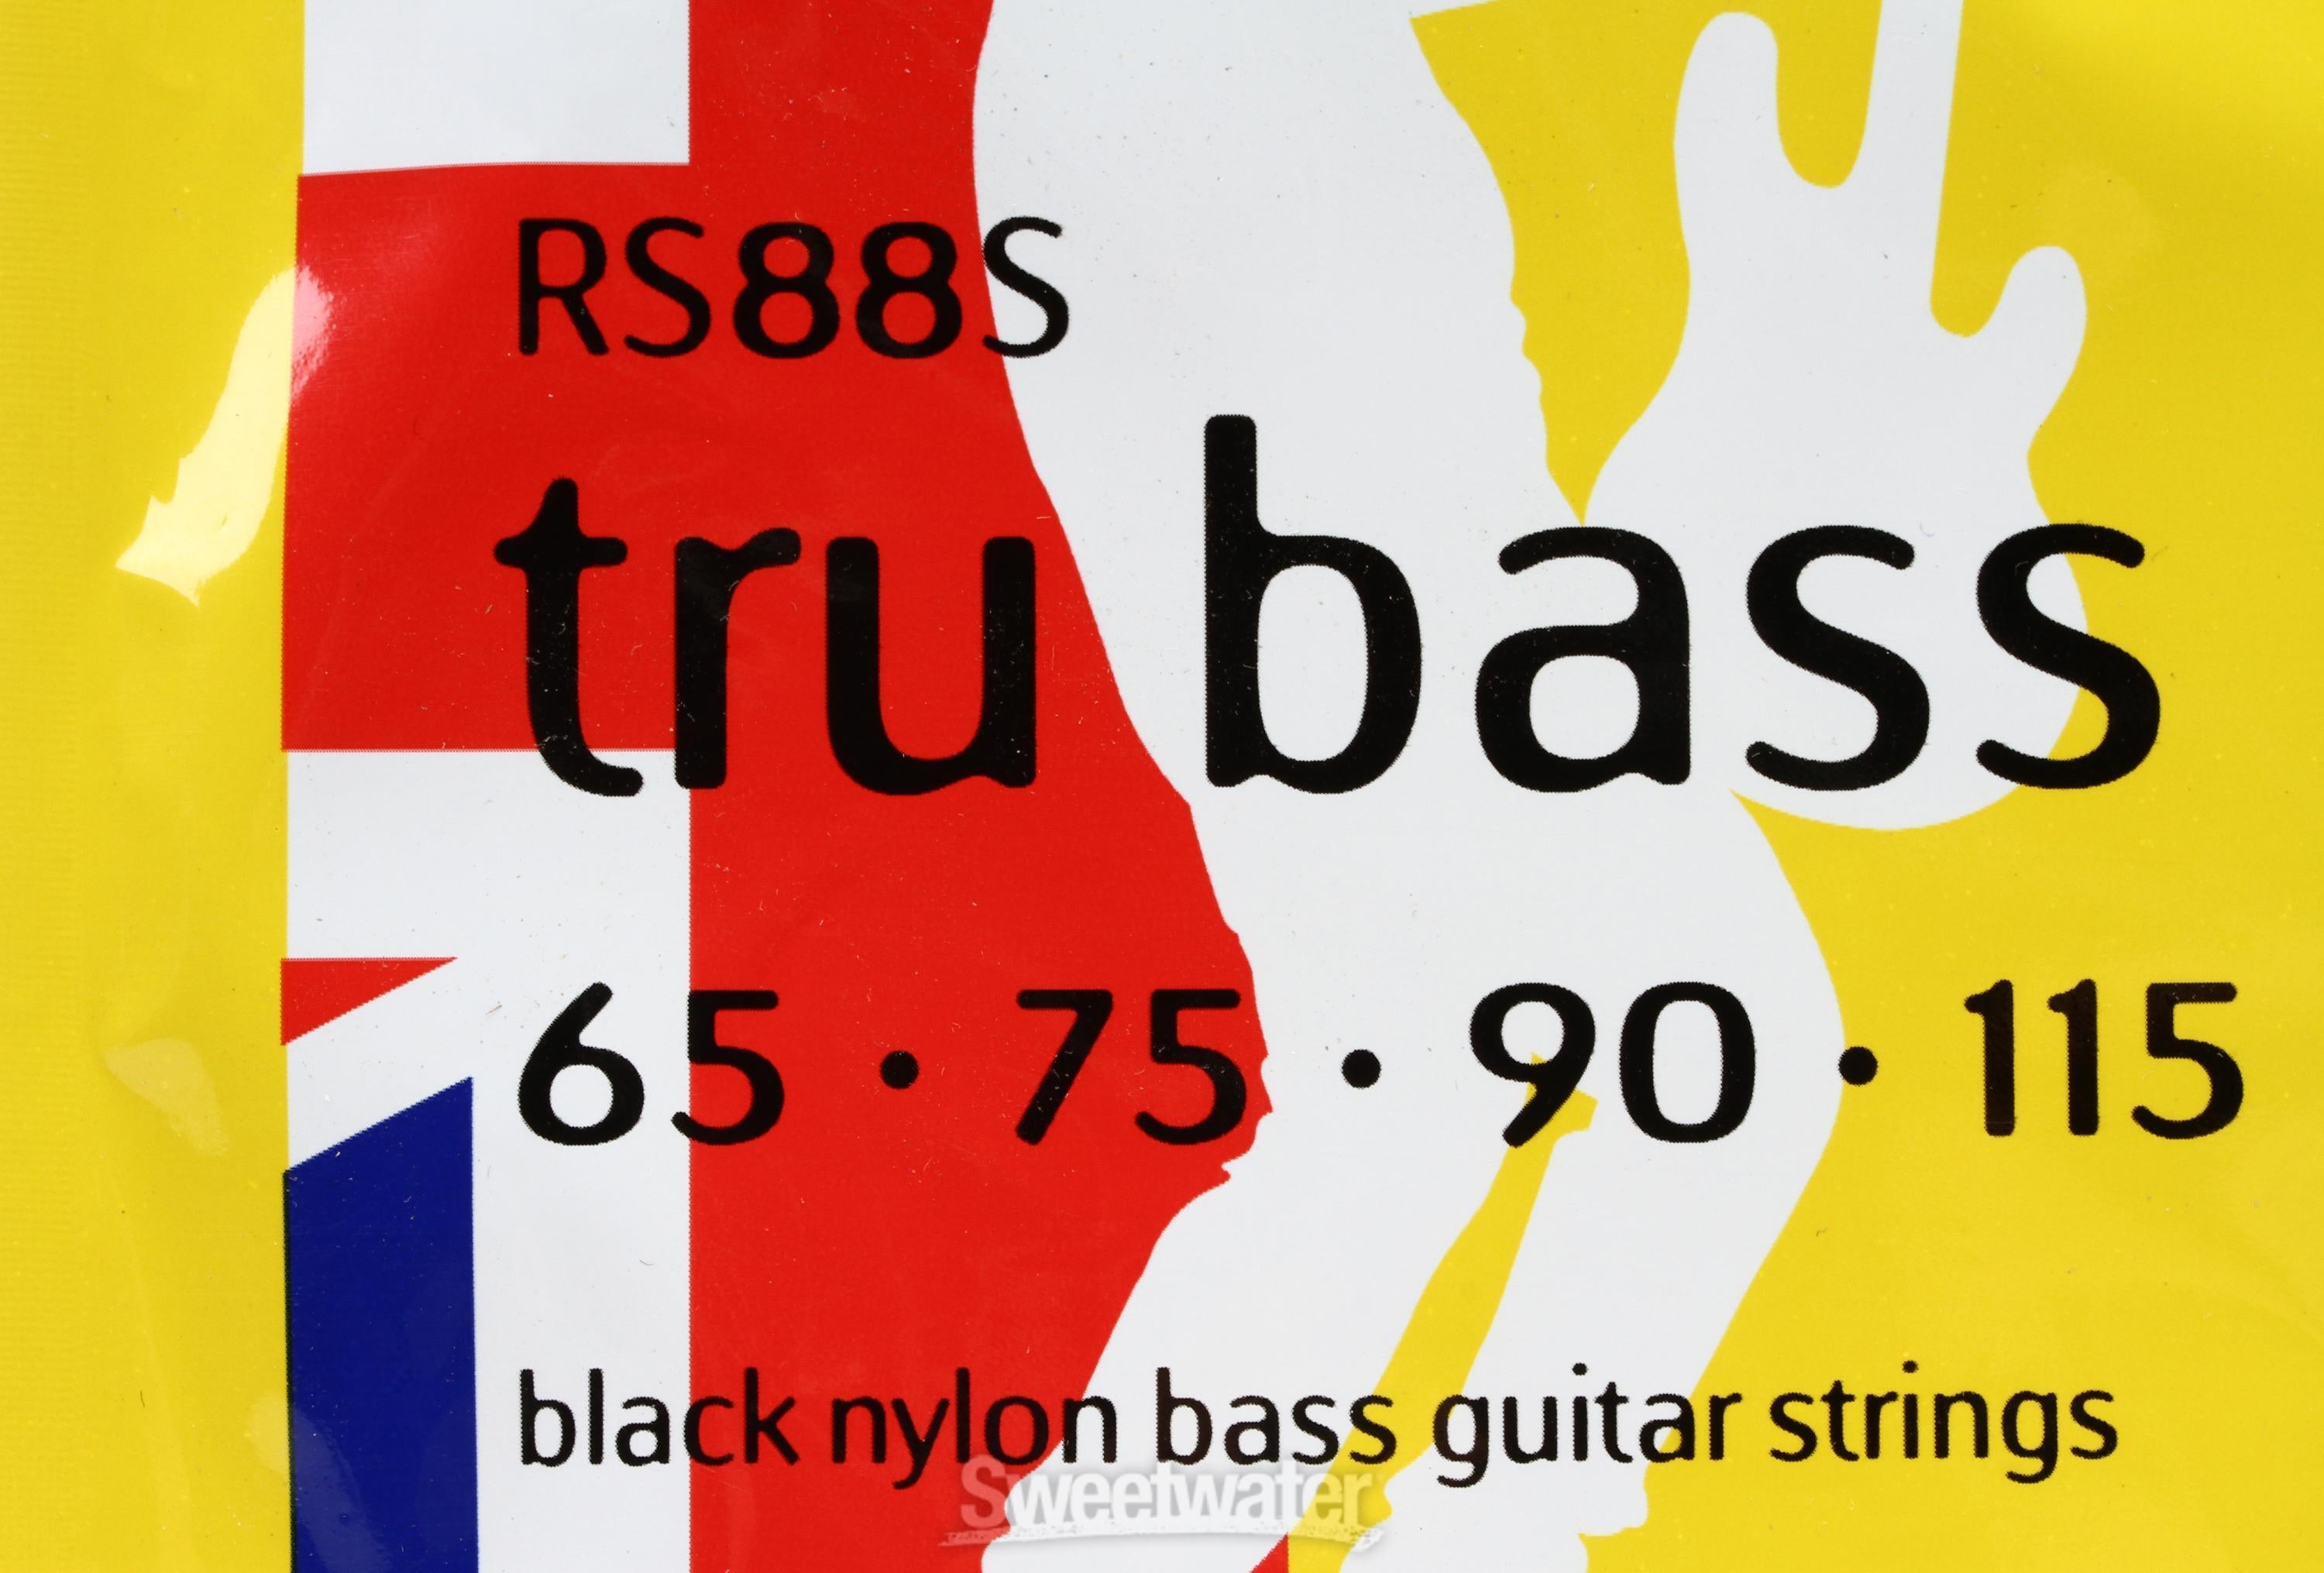 Rotosound RS88S Tru Bass 88 Black Nylon Tapewound Bass Guitar Strings -  .065-.115 Standard Short Scale 4-string | Sweetwater